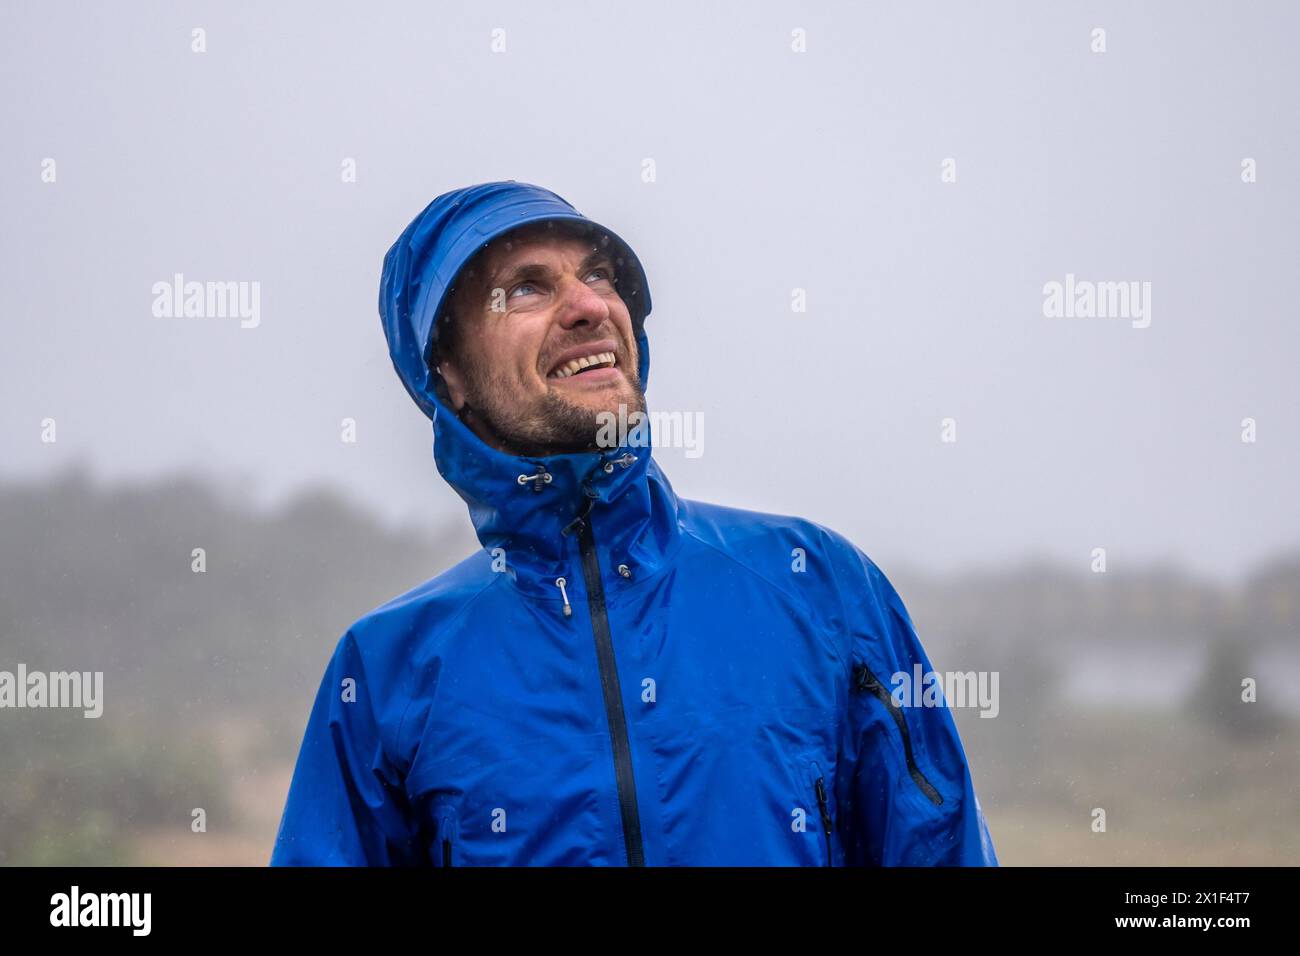 Description: Happy and healthy male tourist staring in sky while smiling and enjoying an active lifestyle in nature and outdoor in the rain. 25 Fontes Stock Photo